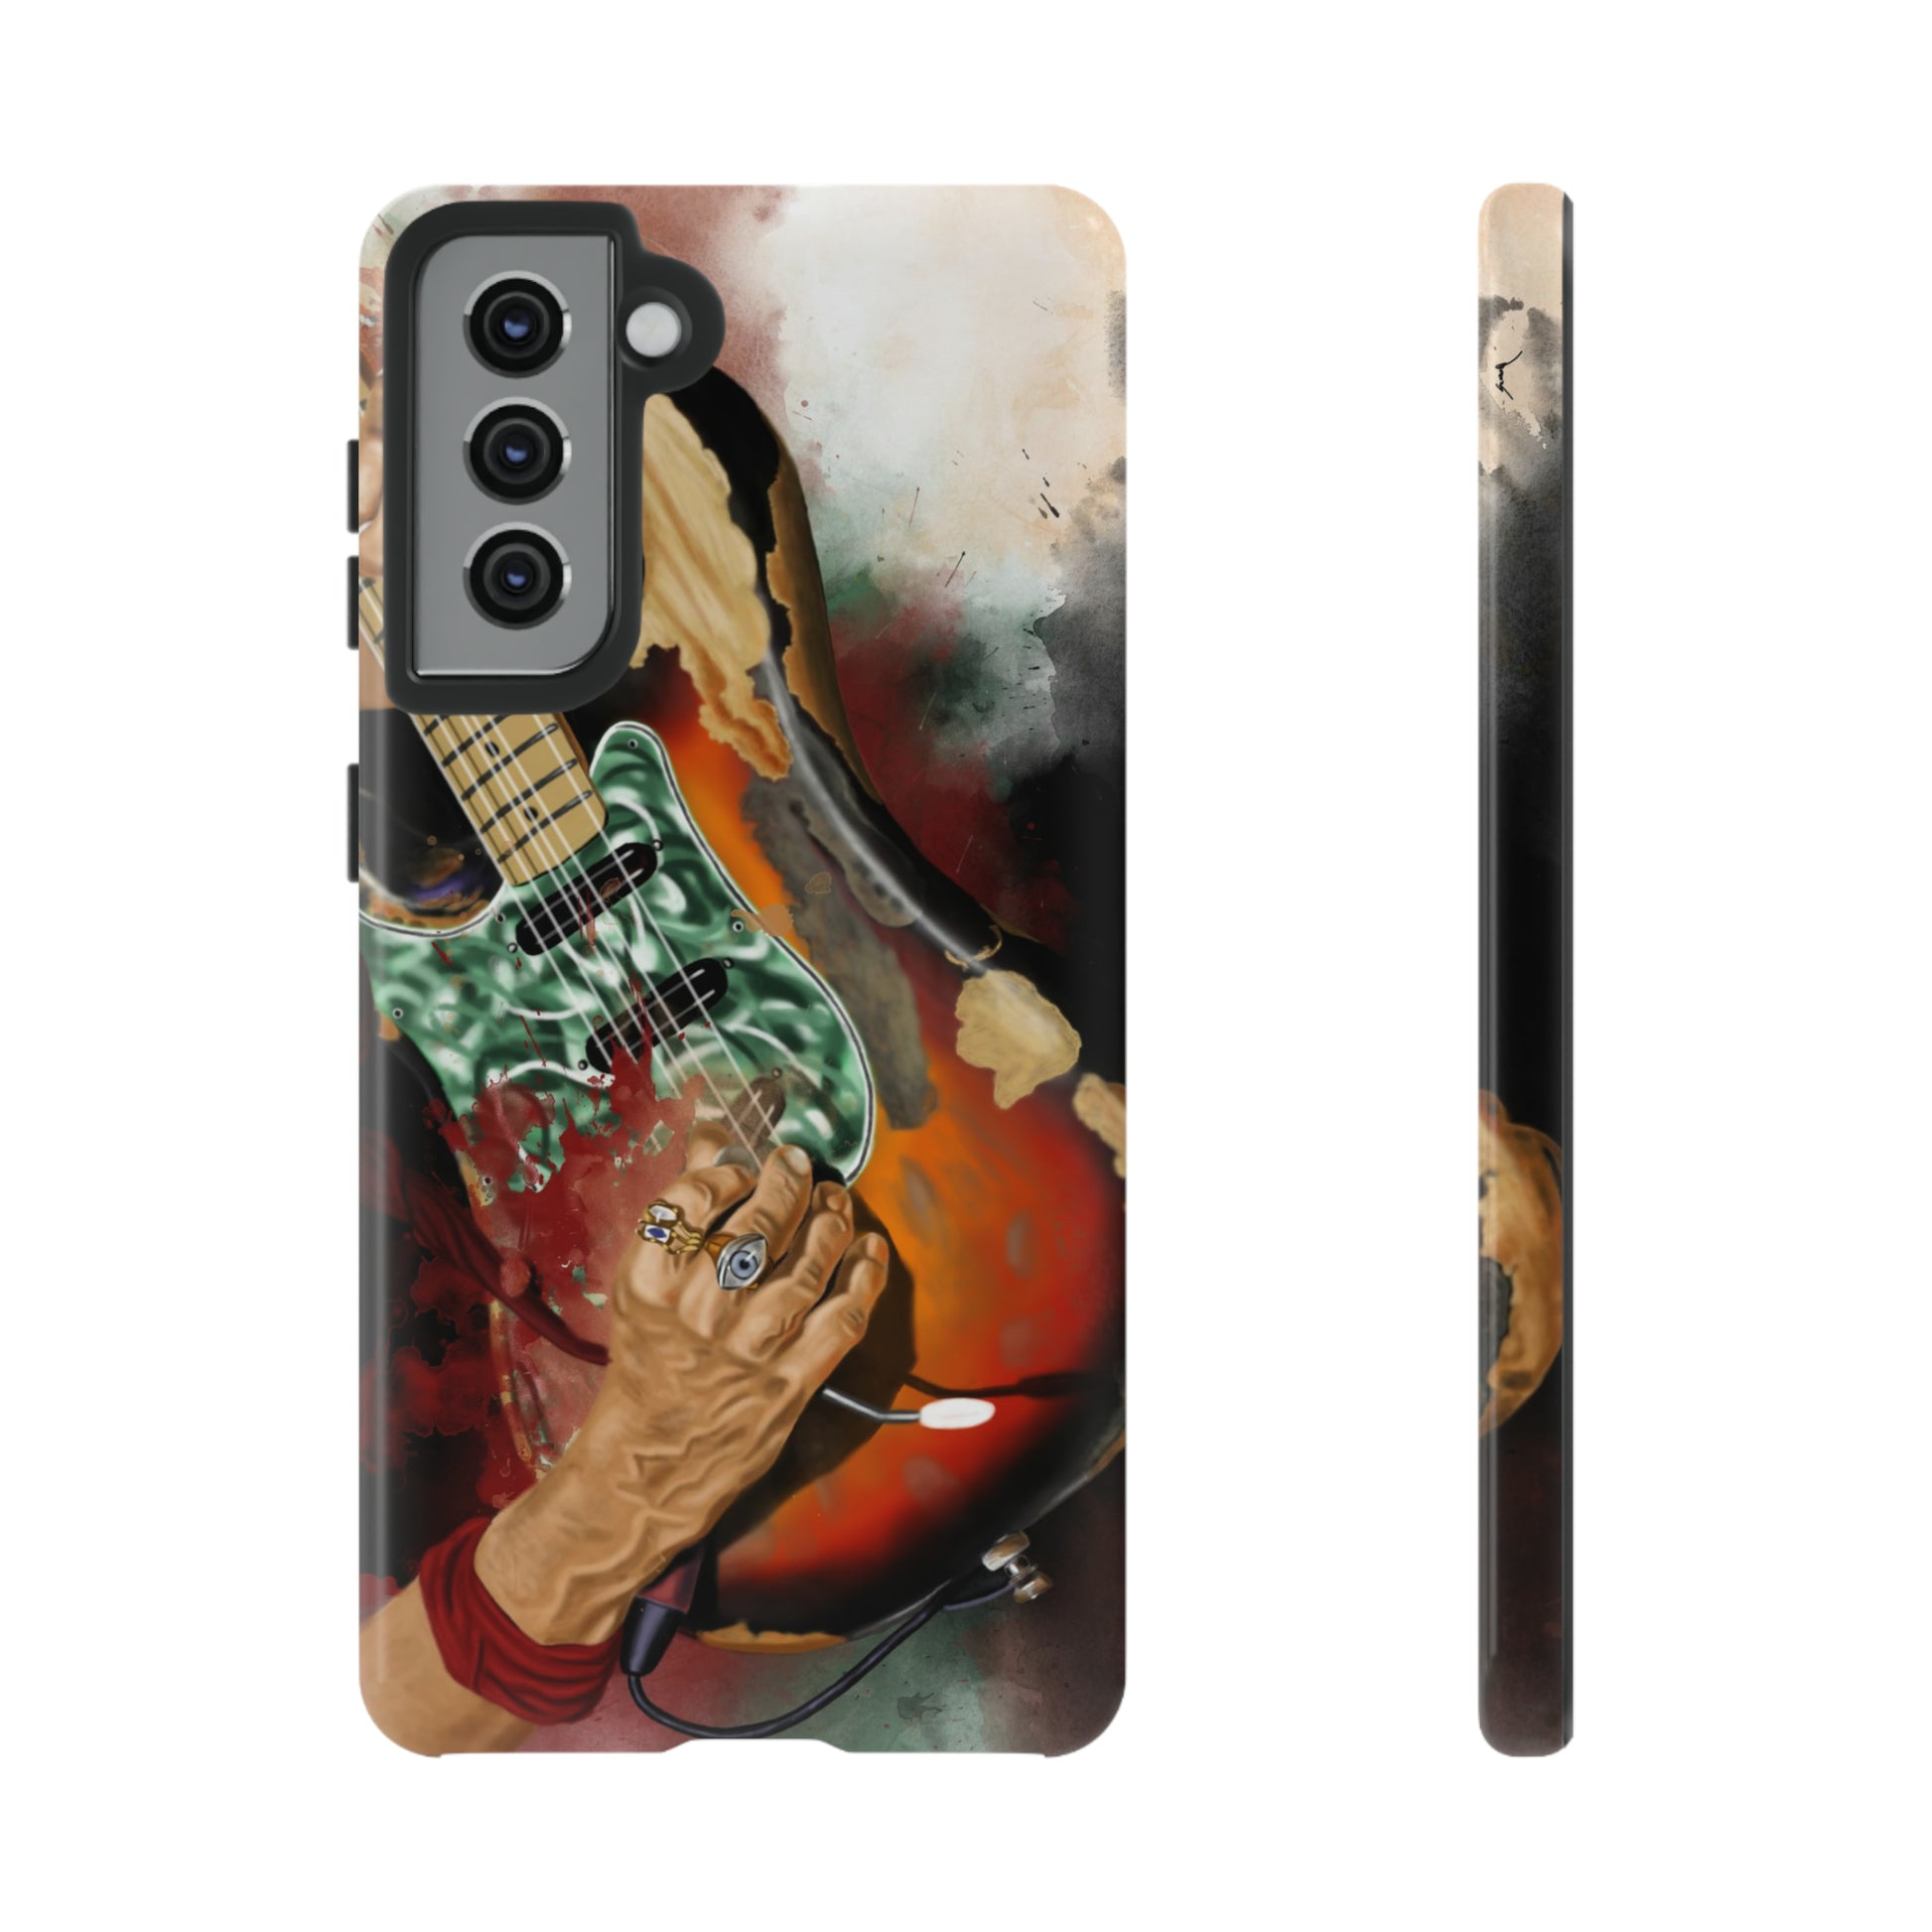 Digital painting of vintage electric guitar with hands printed on samsung phone case